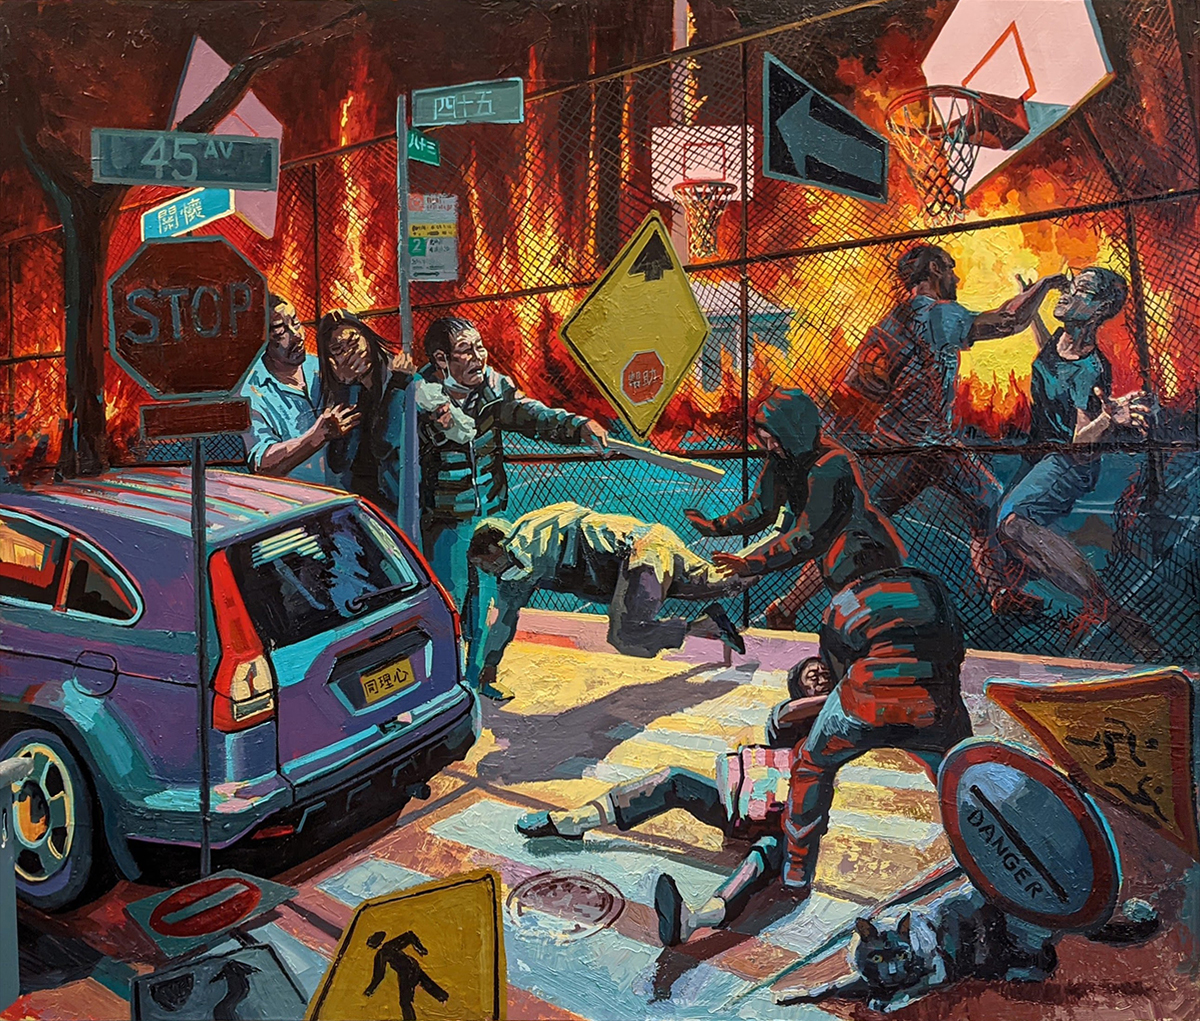 'A Day In The Life Of Chemin Hsiao (Allegory Of A Sucker Punch)', Teresa Dunn, Oil on linen, 114 x 132 cm